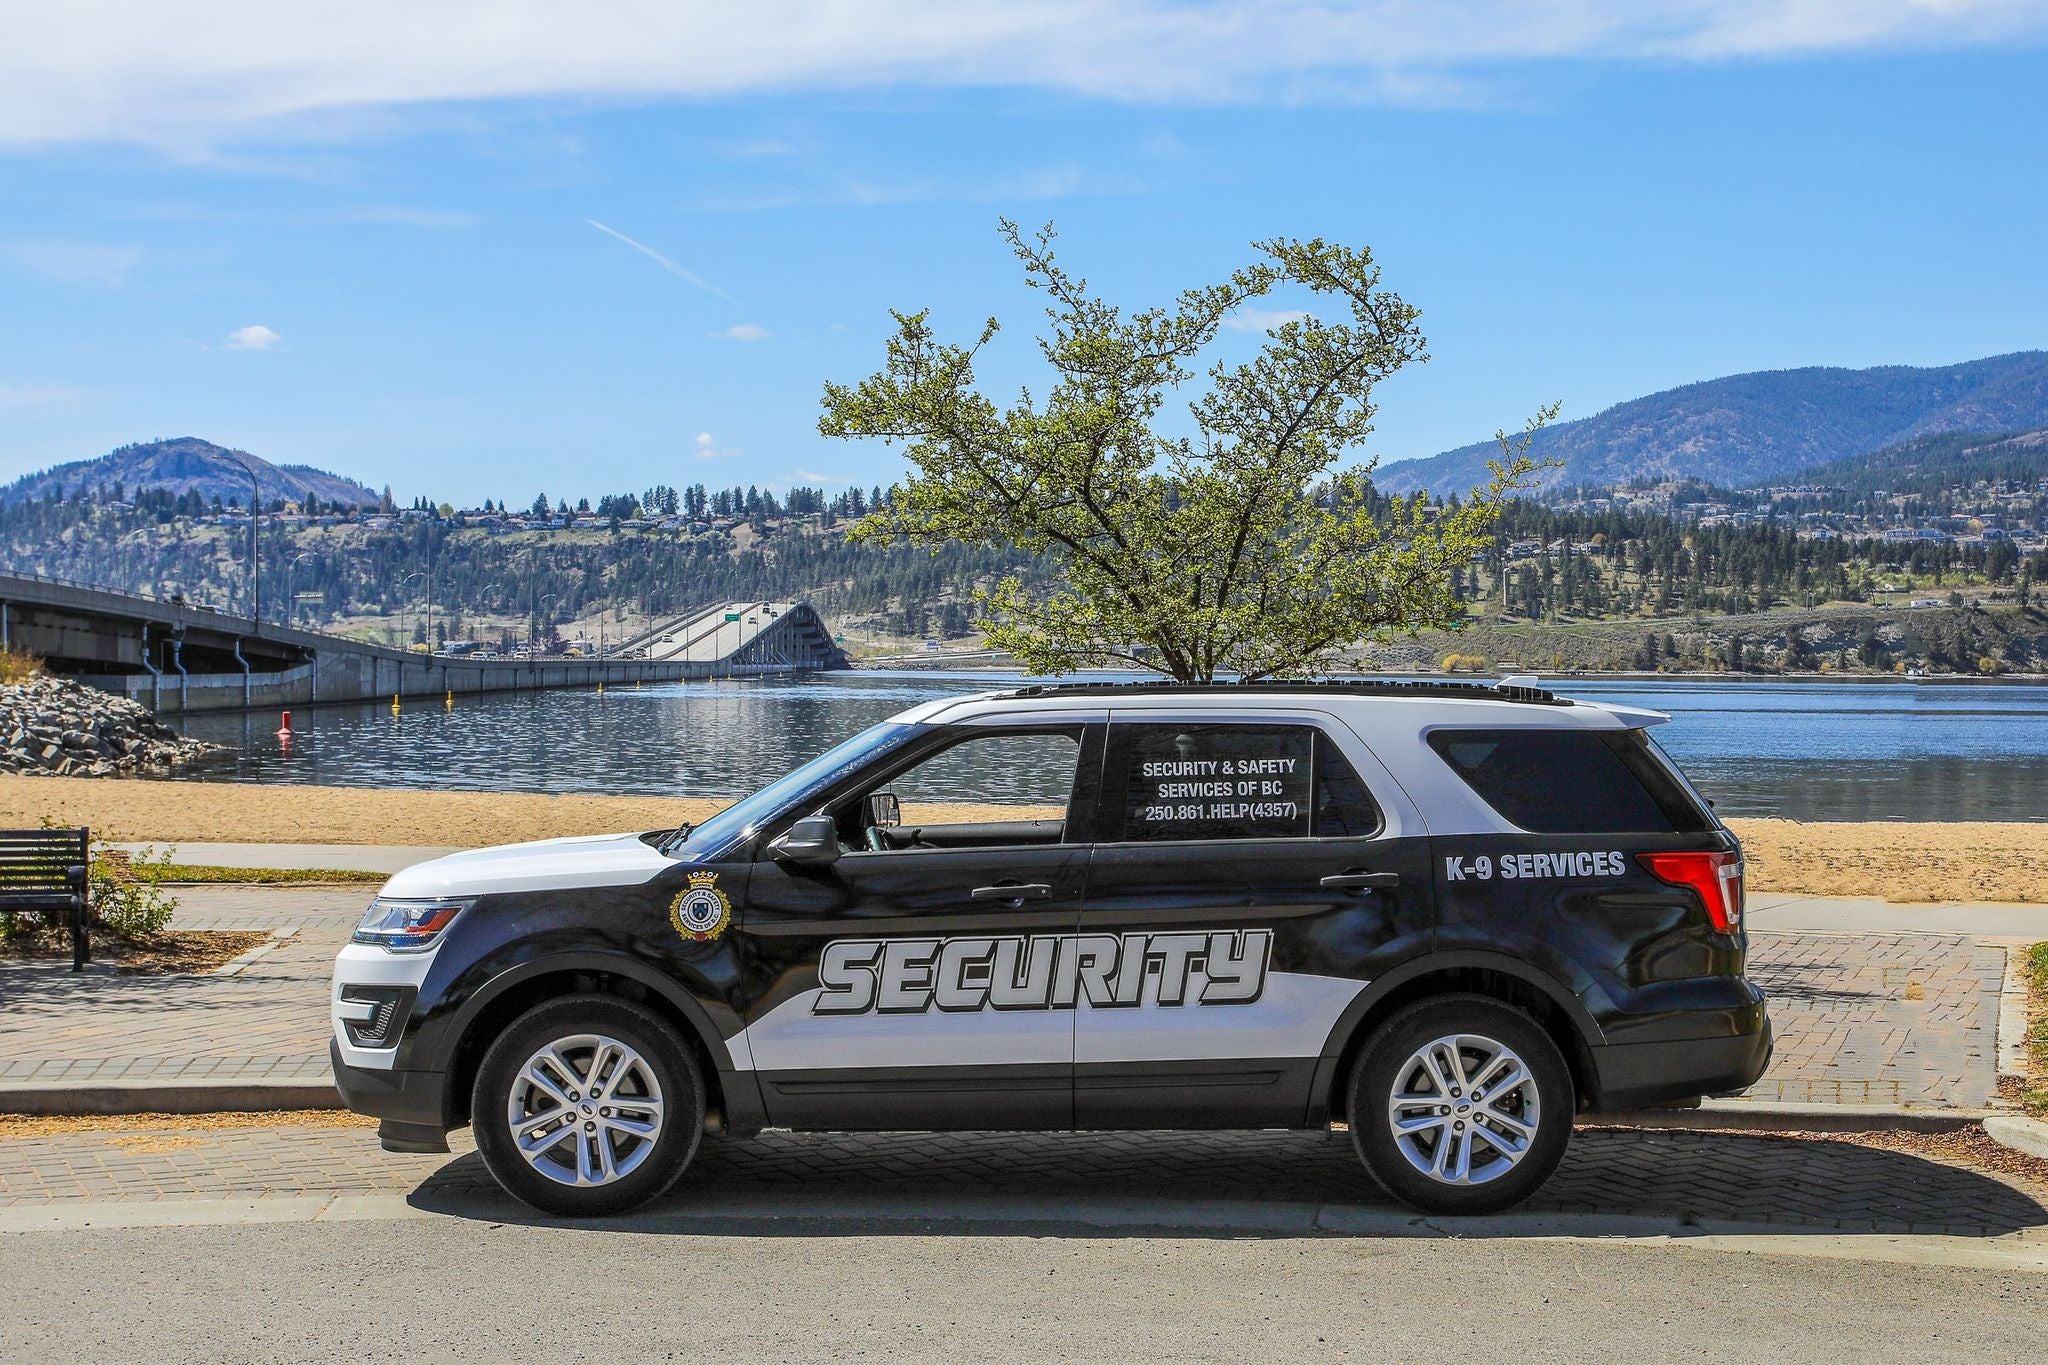 Turner Security Services